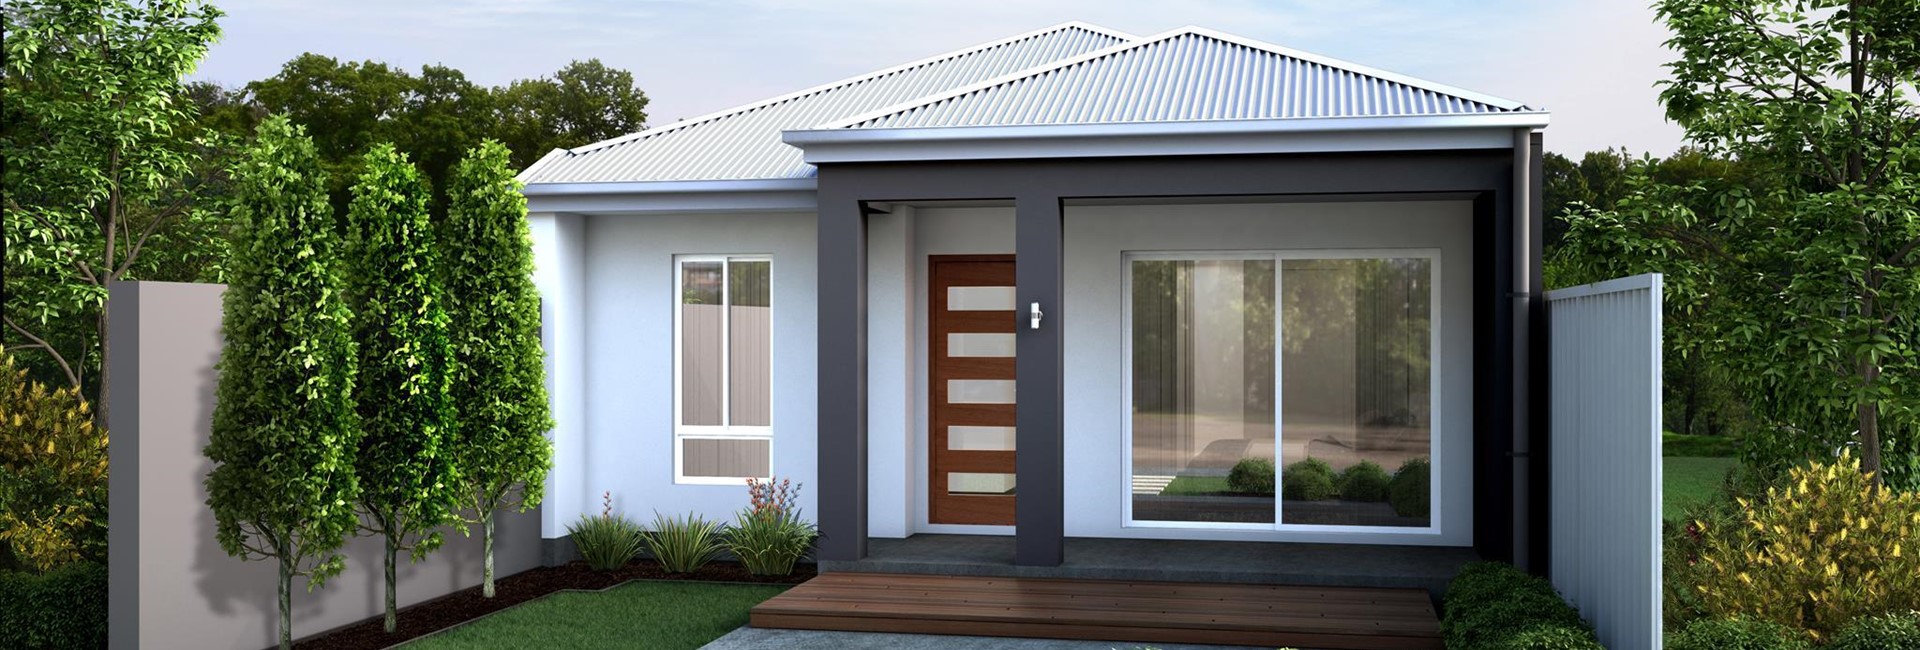 ACHIEVE THE BEST  WITH SMALL  BLOCK  HOUSE  PLANS TO SUIT 